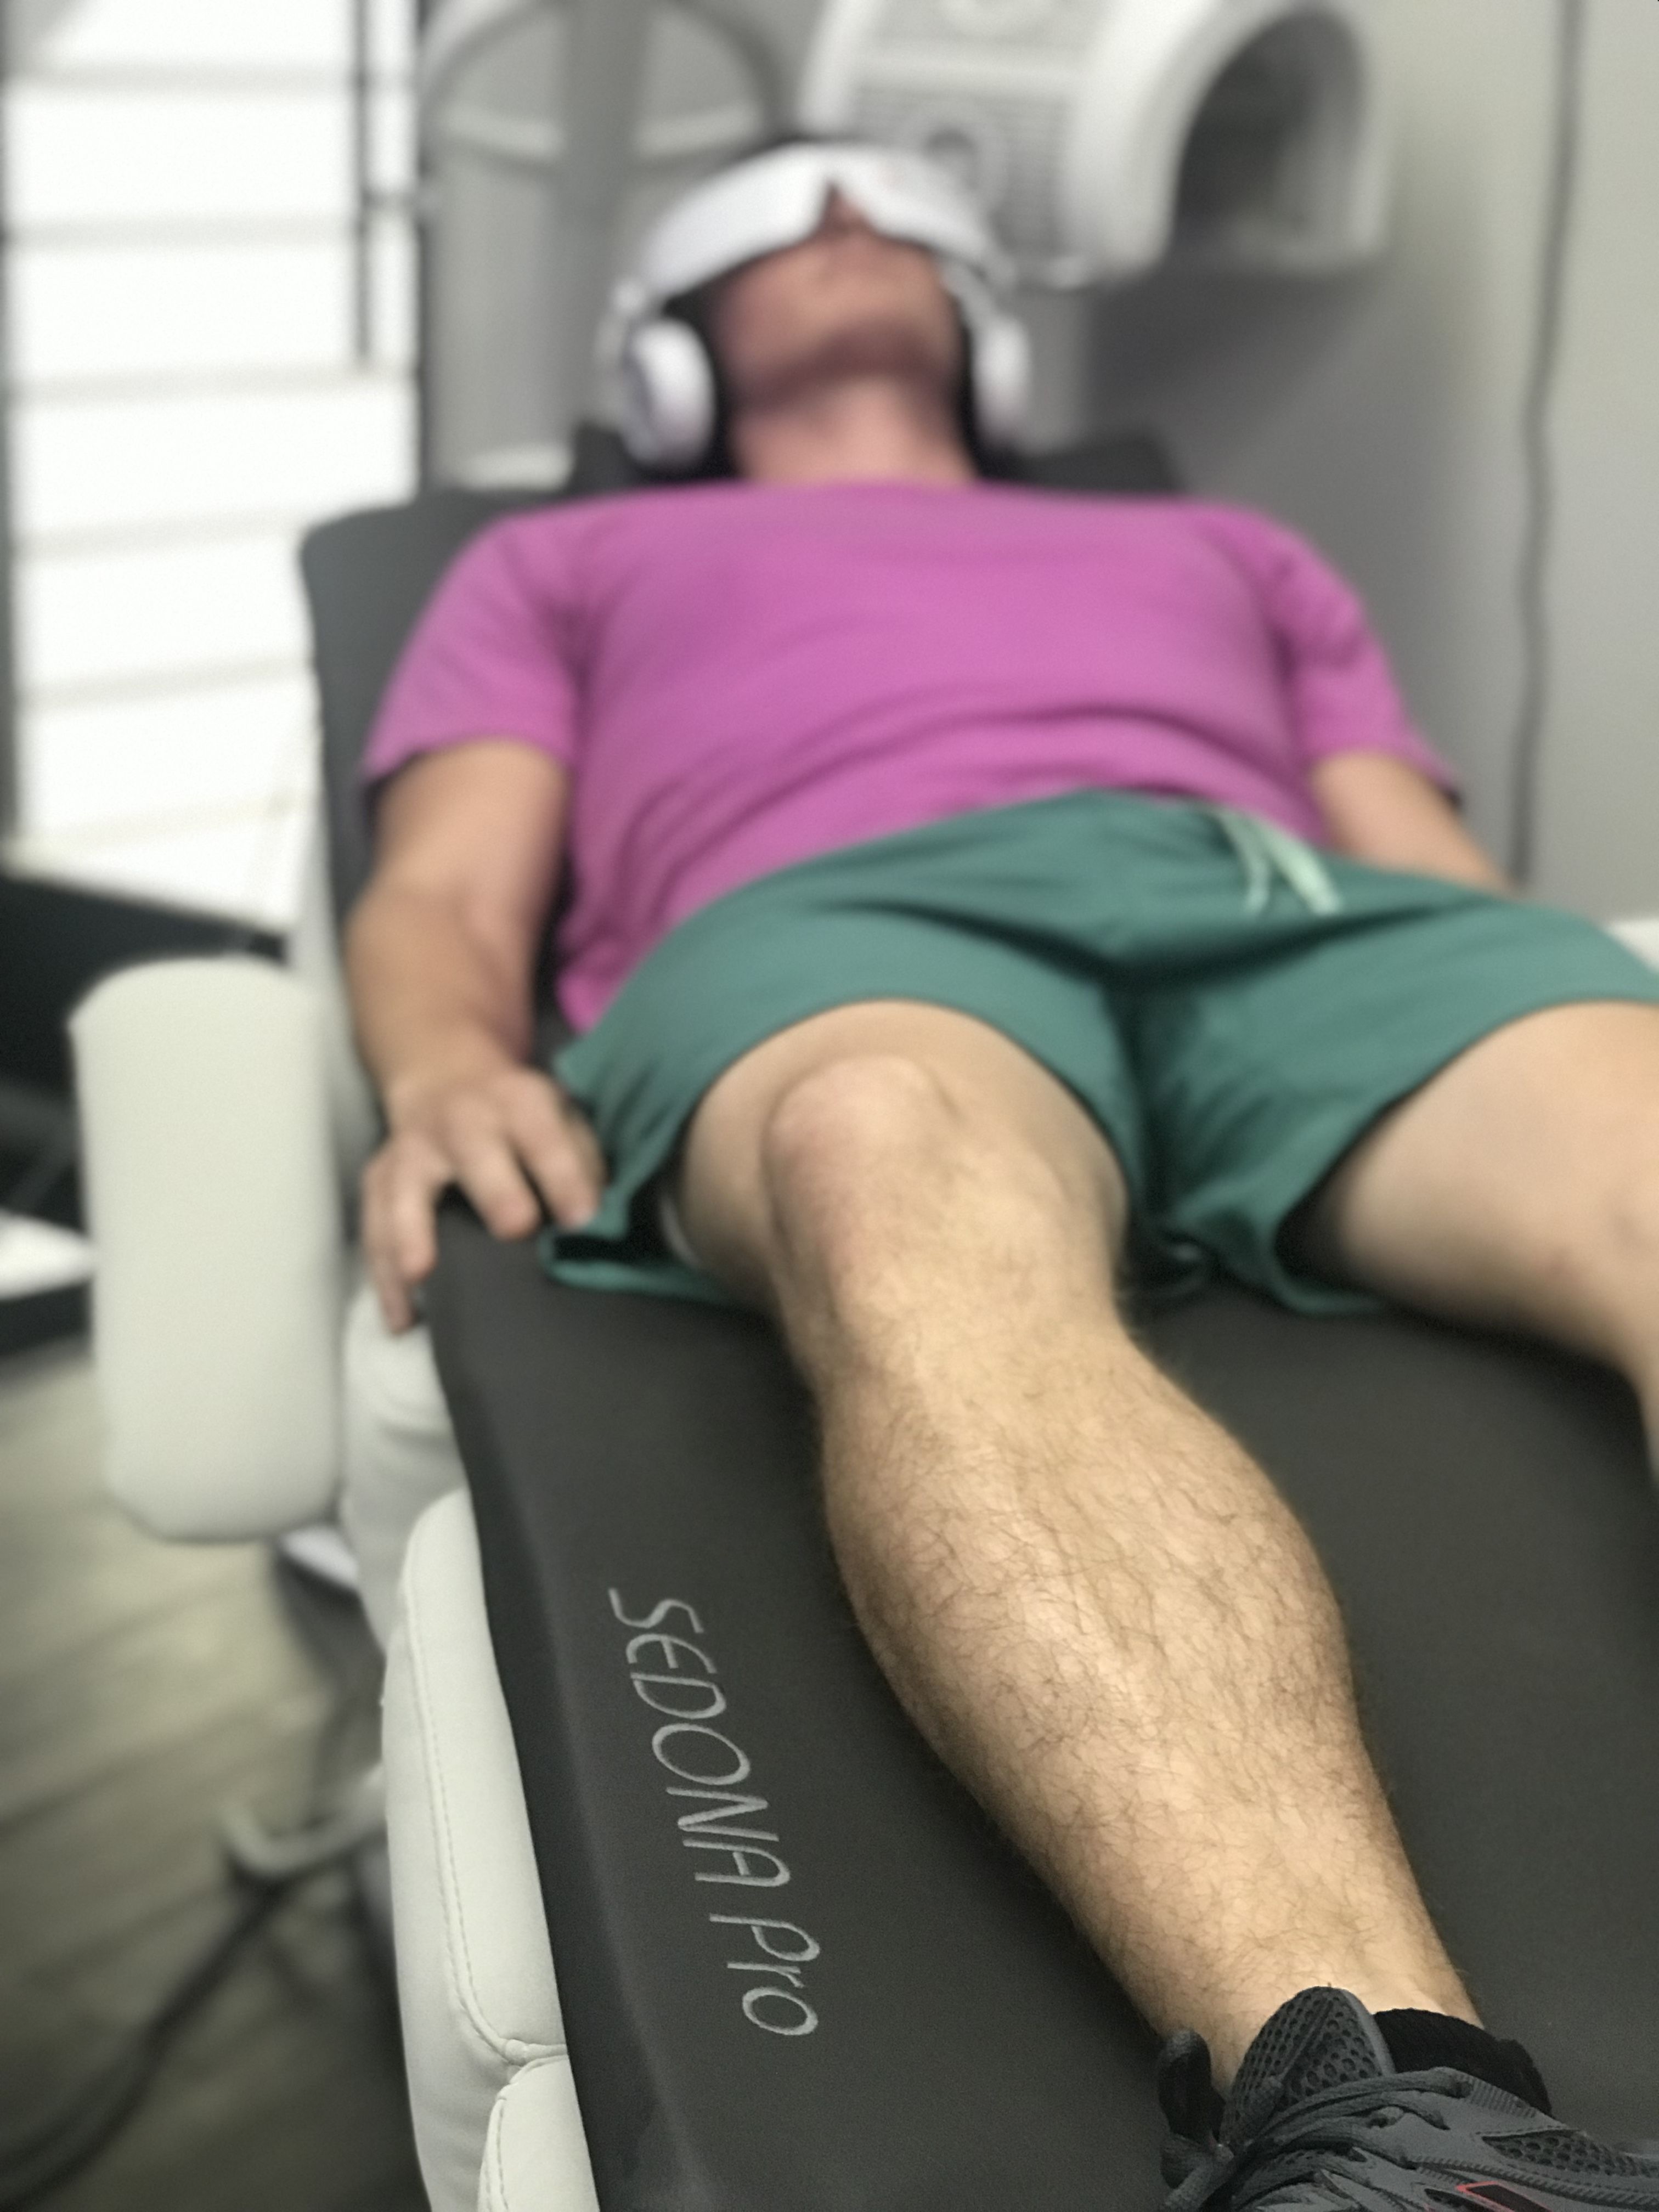 Pulsated Electromagnetic Field Therapy